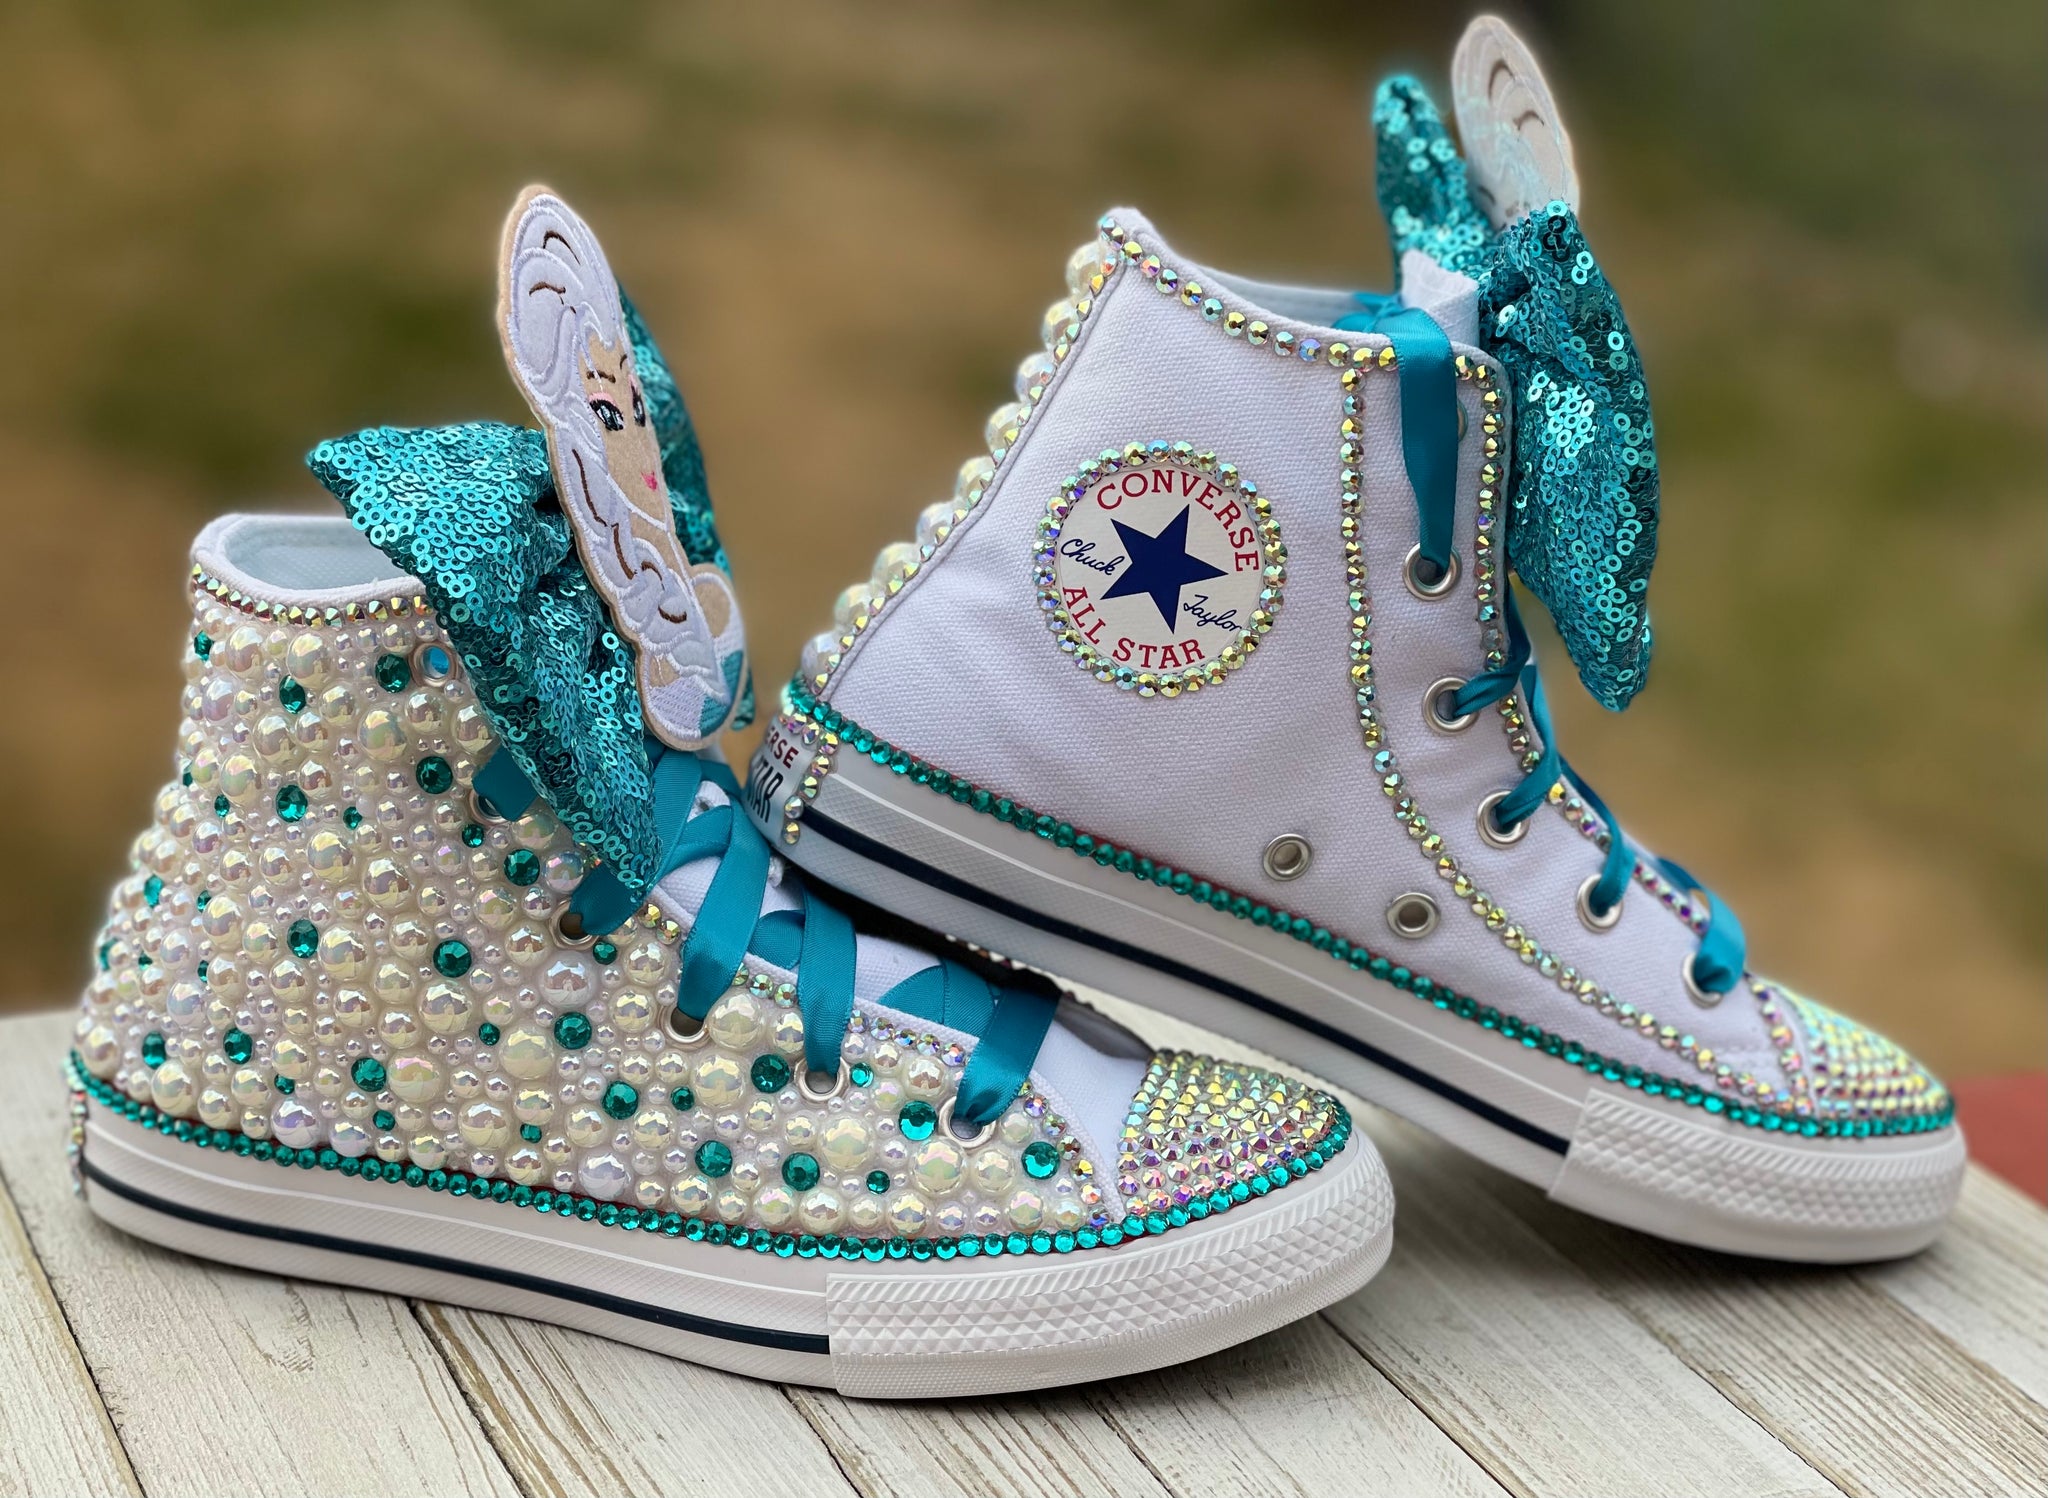 Blue Converse Bling Sneakers, Infants and Toddler Shoe Size 2-9 (Hard